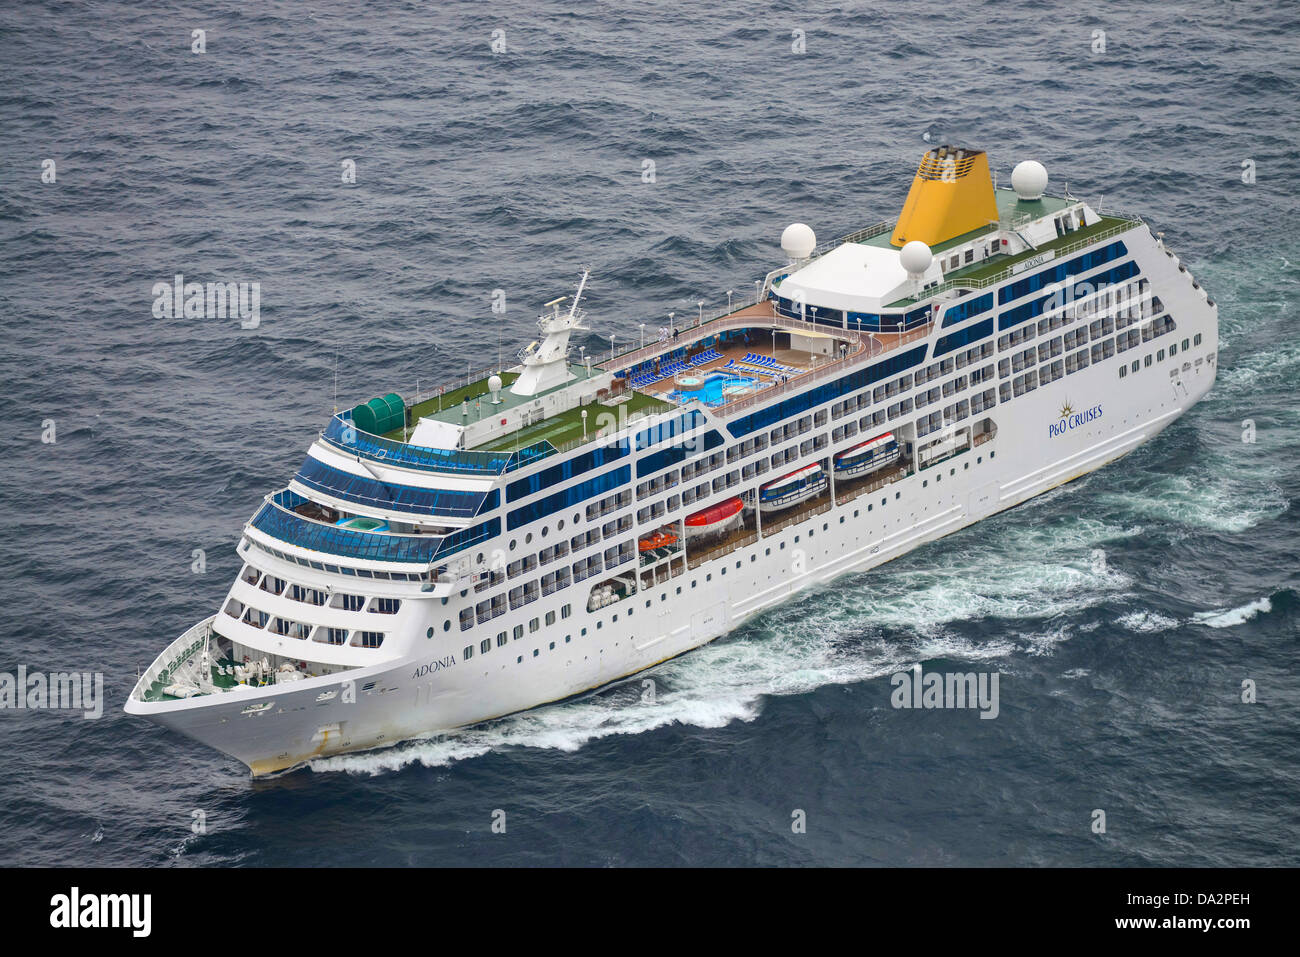 Aerial photograph of the Adonia cruise liner Stock Photo